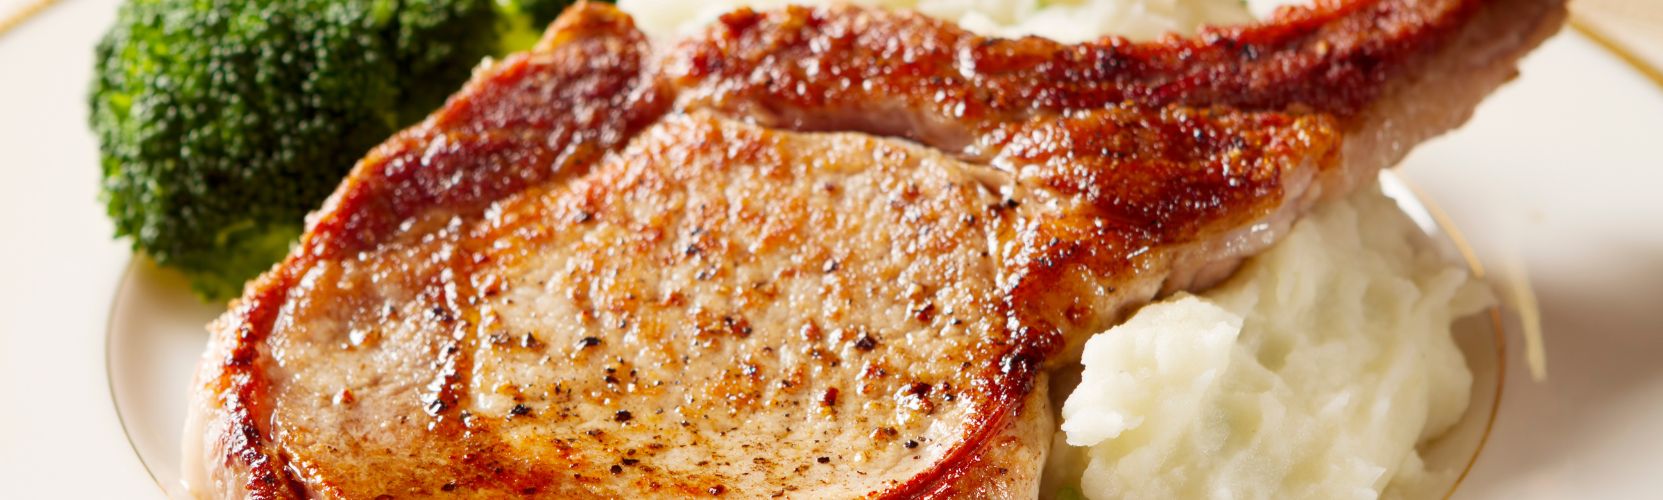 10 minutes to Tasty. How to cook Perfect Pork Chops